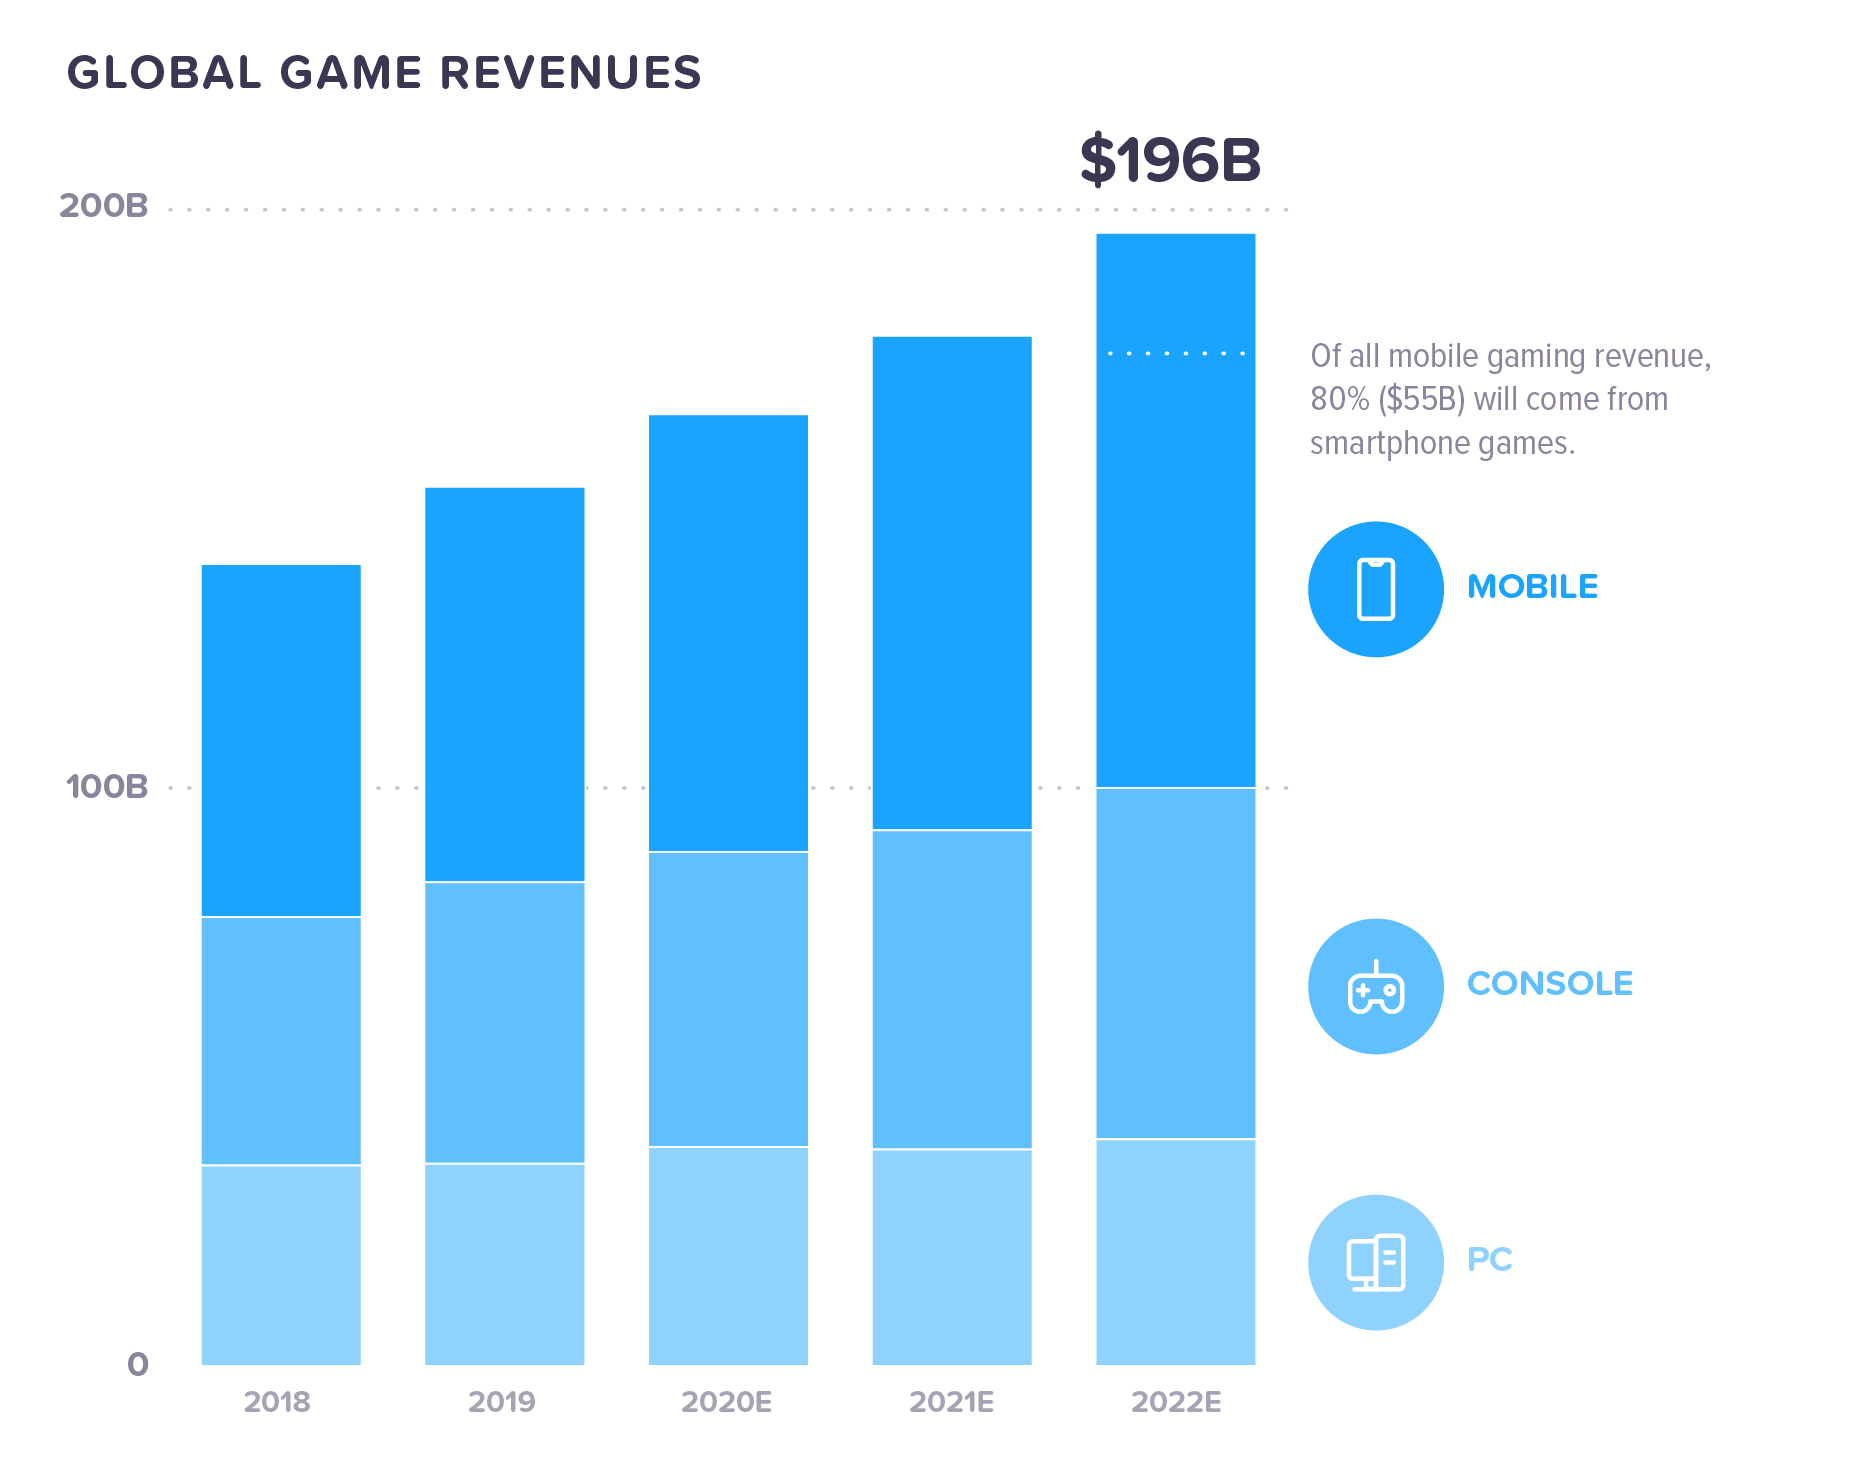 rise of gaming revenue visualized download free